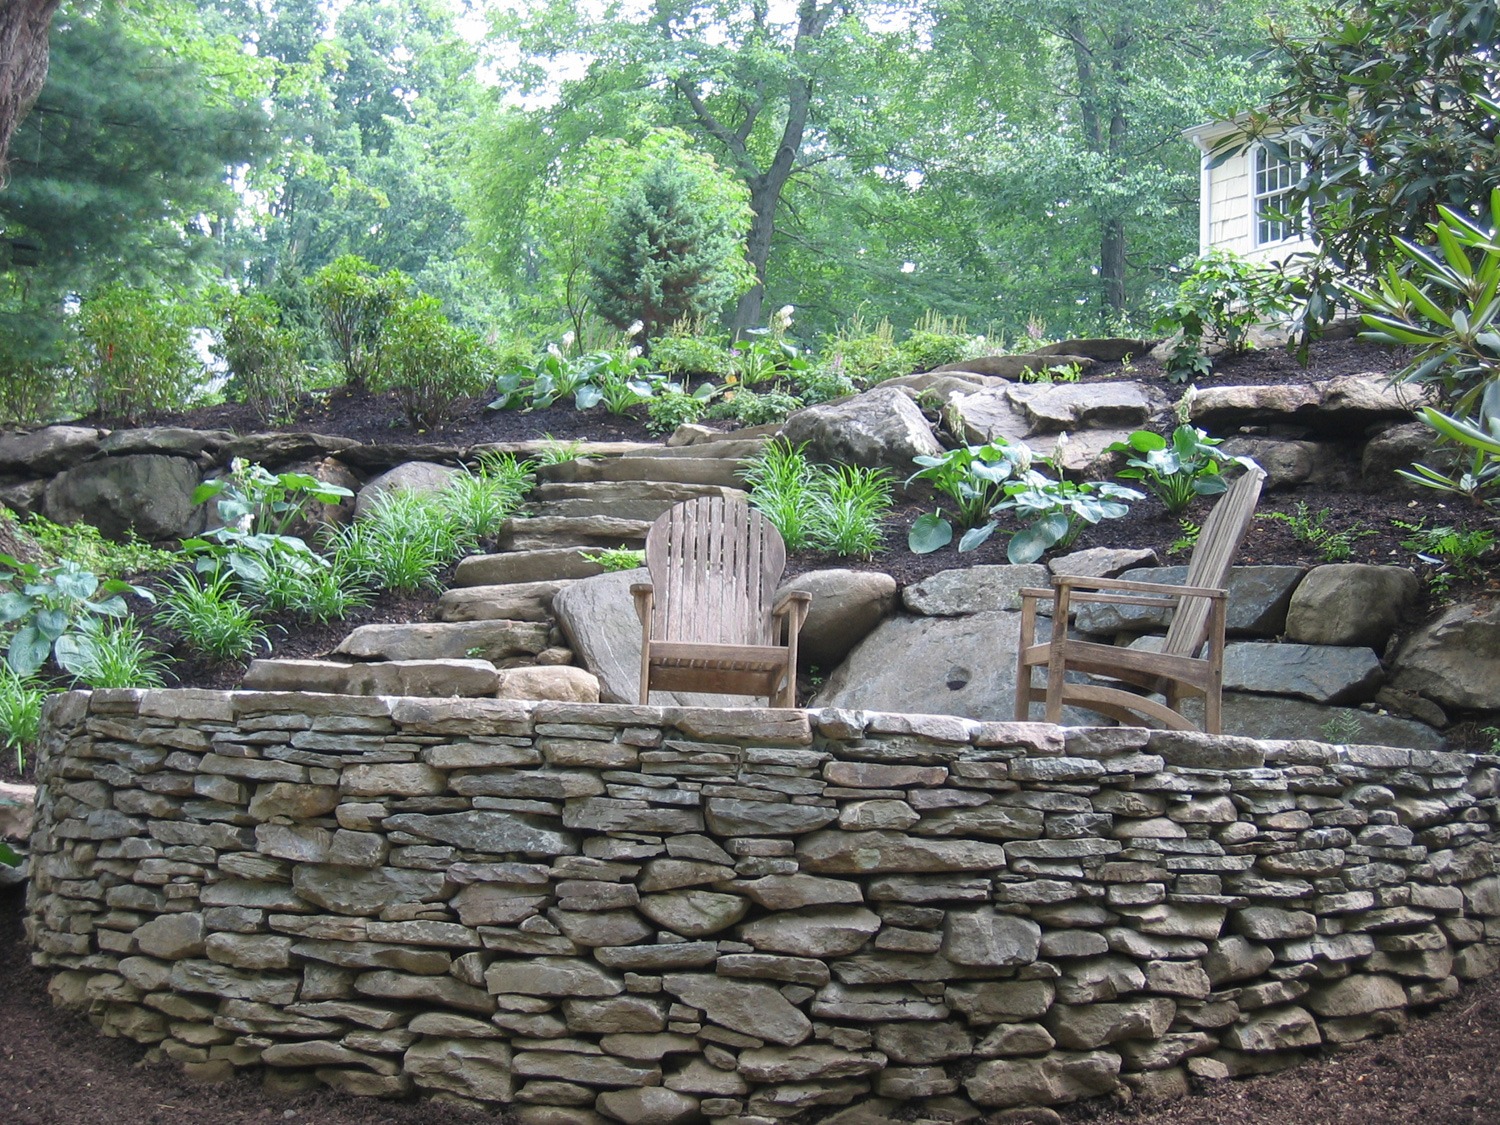 An outdoor stone wall and steps lead to a lush garden. Two wooden chairs invite relaxation amidst green trees and shrubs in a tranquil setting.